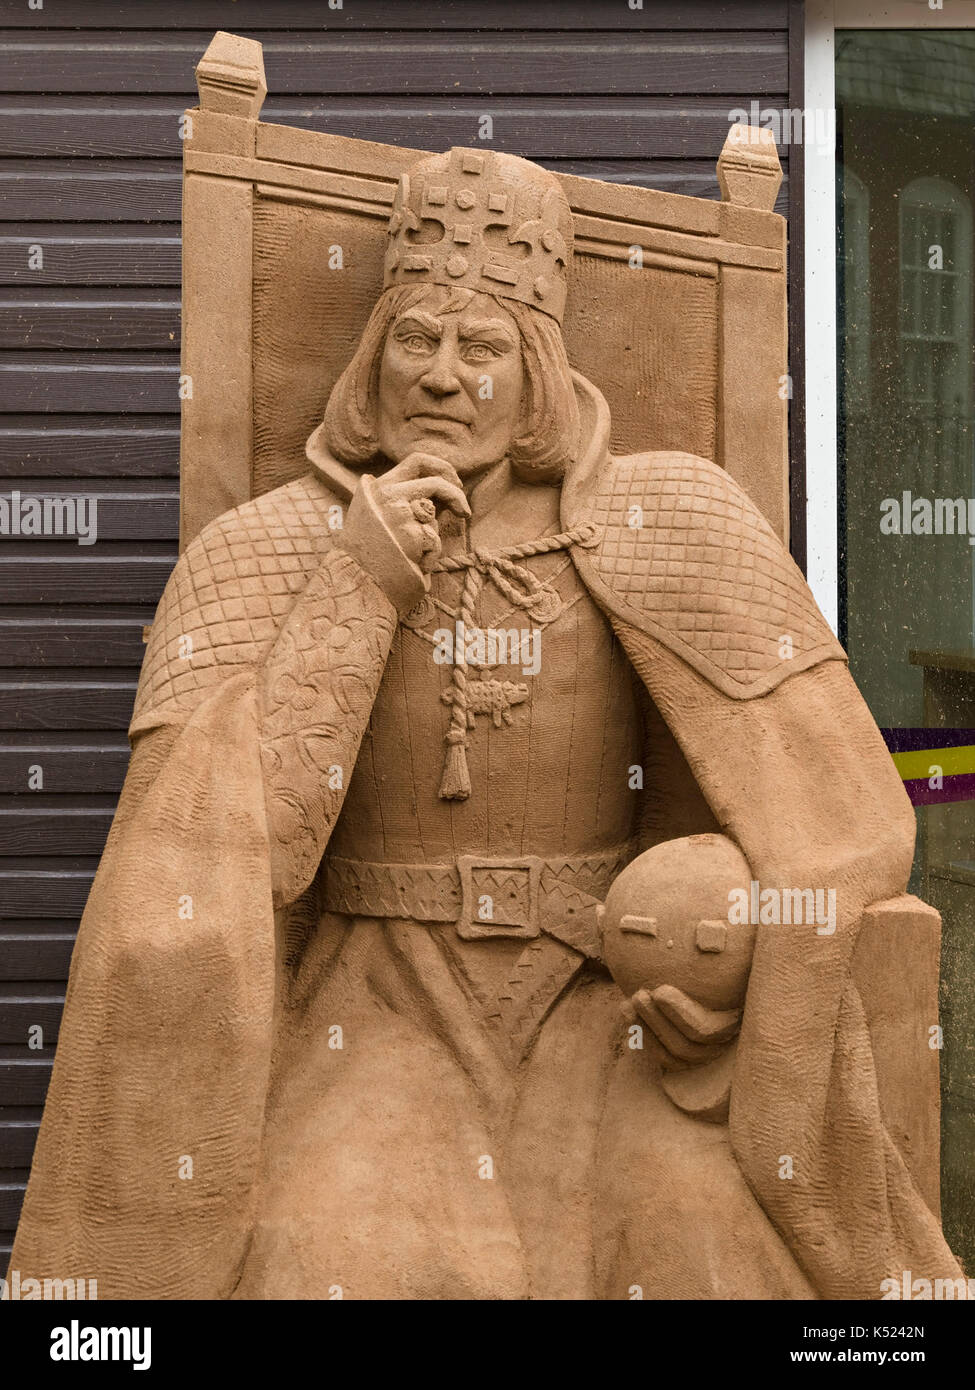 Sand sculpture of King Richard III called Good vs Evil by Nicola Wood on display at the King Richard III visitor centre in Leicester, England, UK Stock Photo